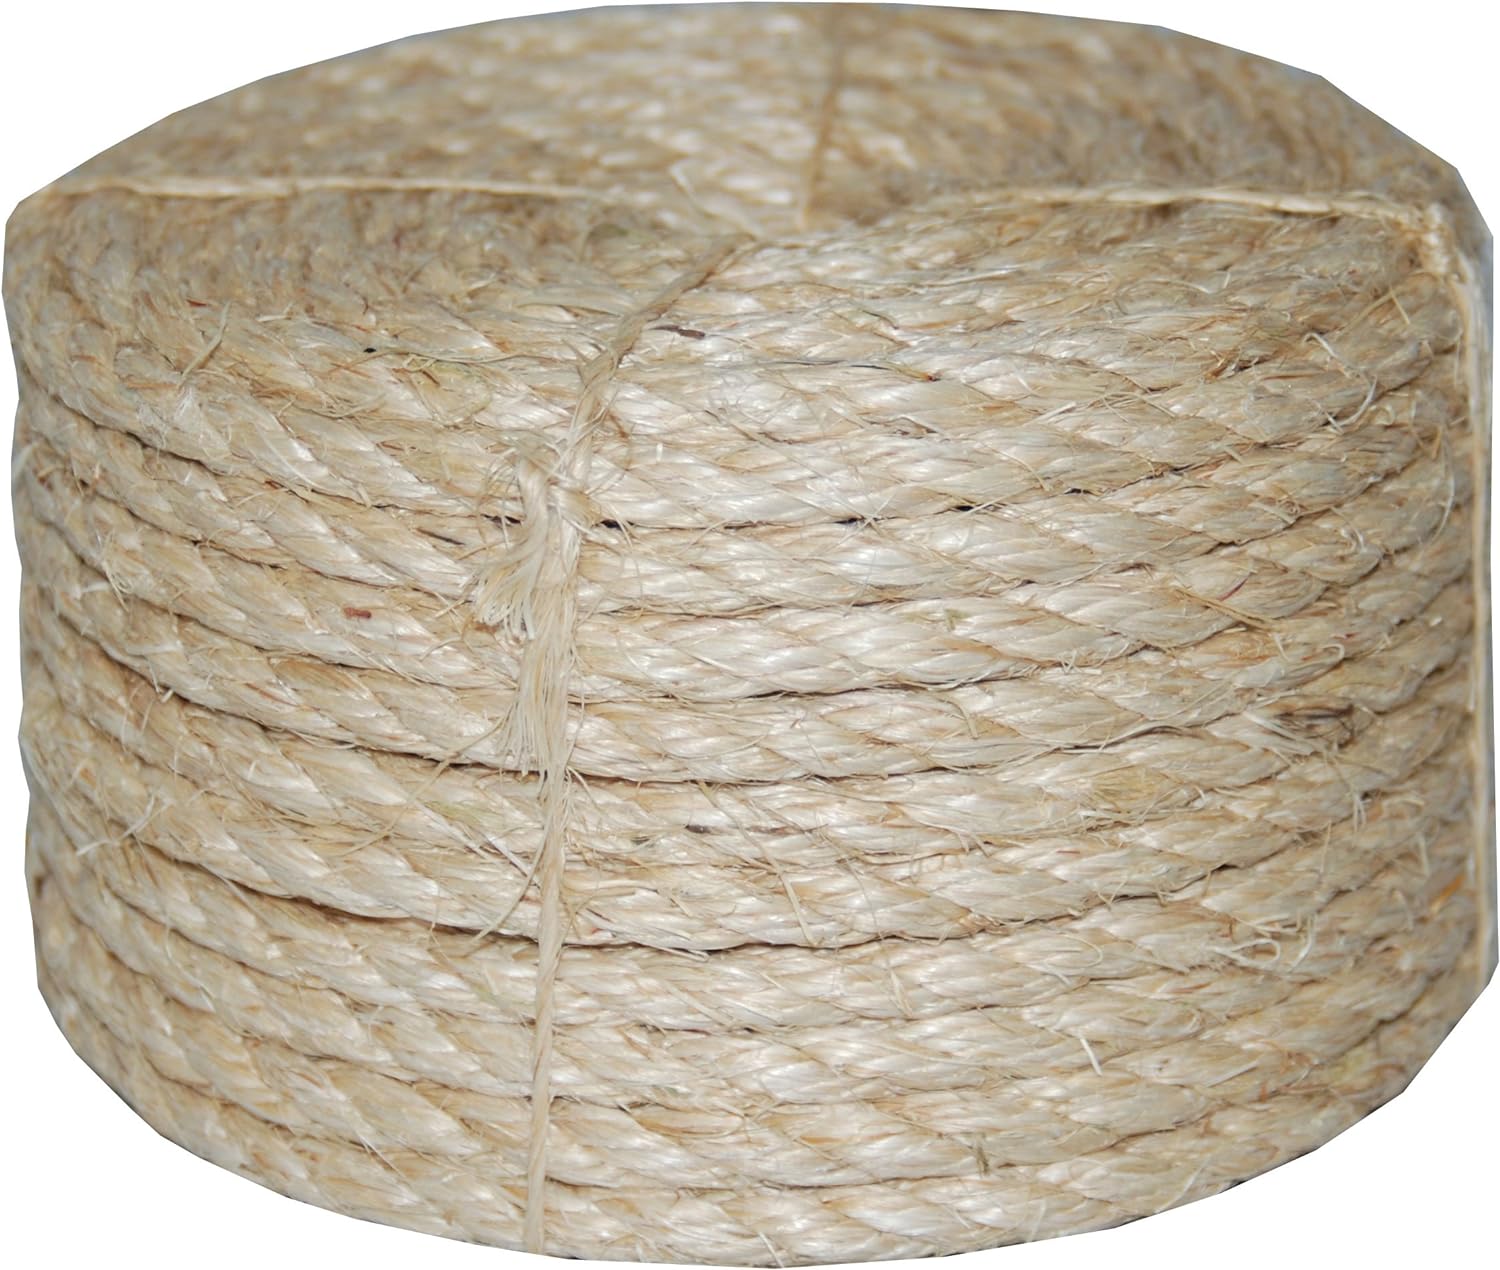 T.W . Evans Cordage Co. Twisted Sisal Rope